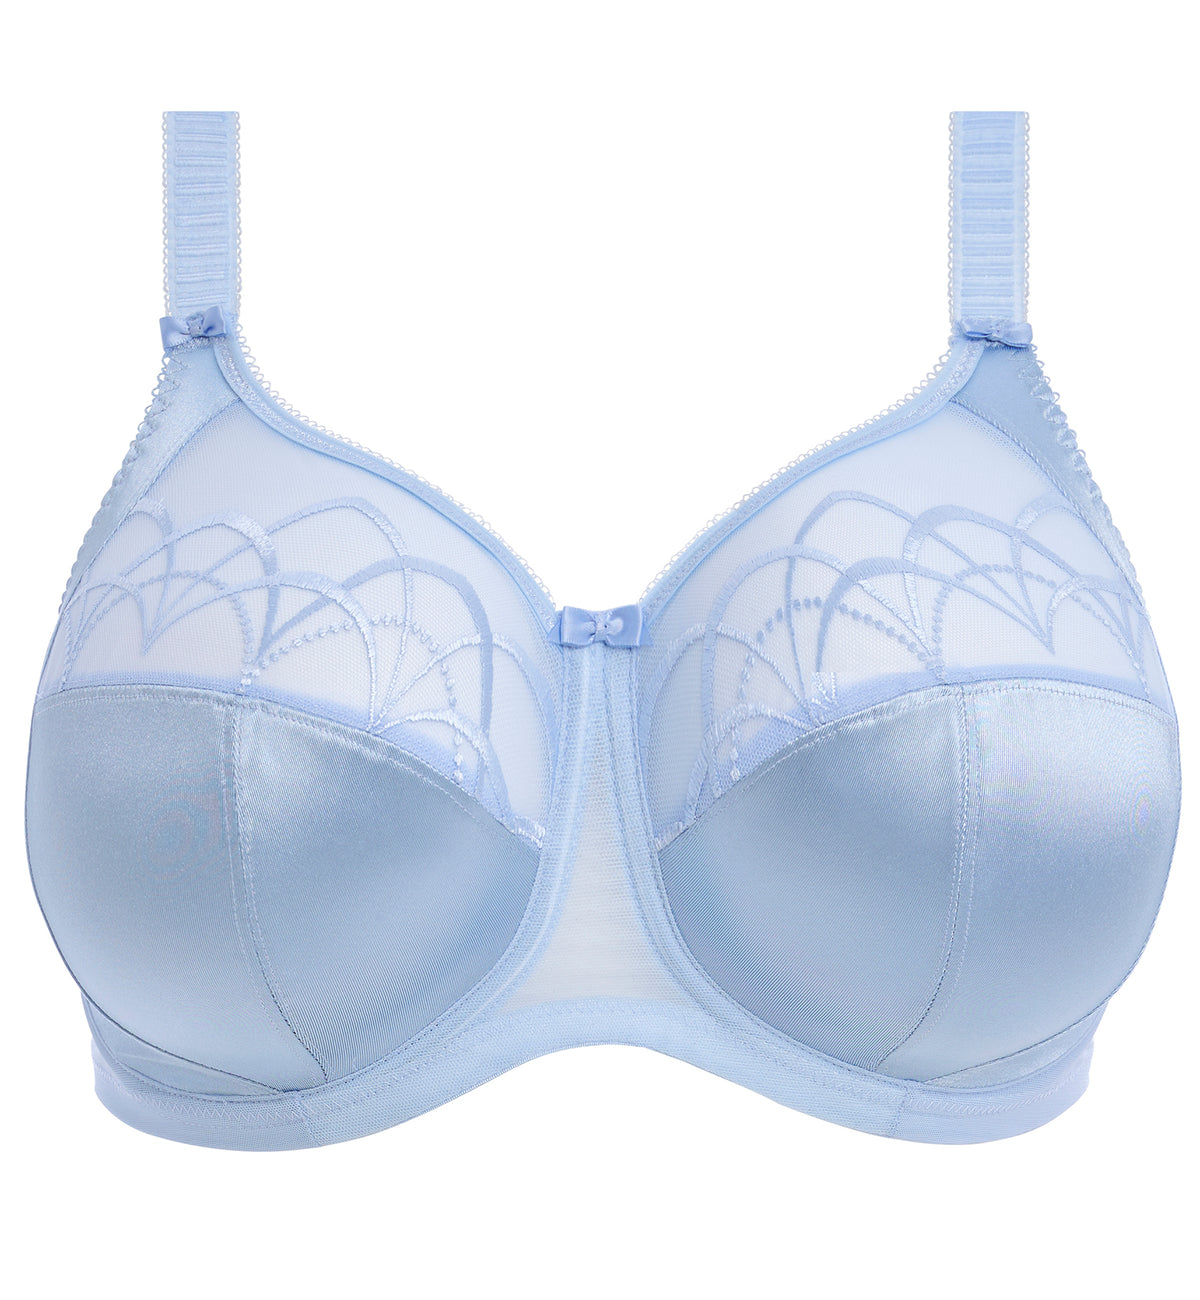 Elomi Cate Embroidered Full Cup Banded Underwire Bra (4030)- Alaska -  Breakout Bras